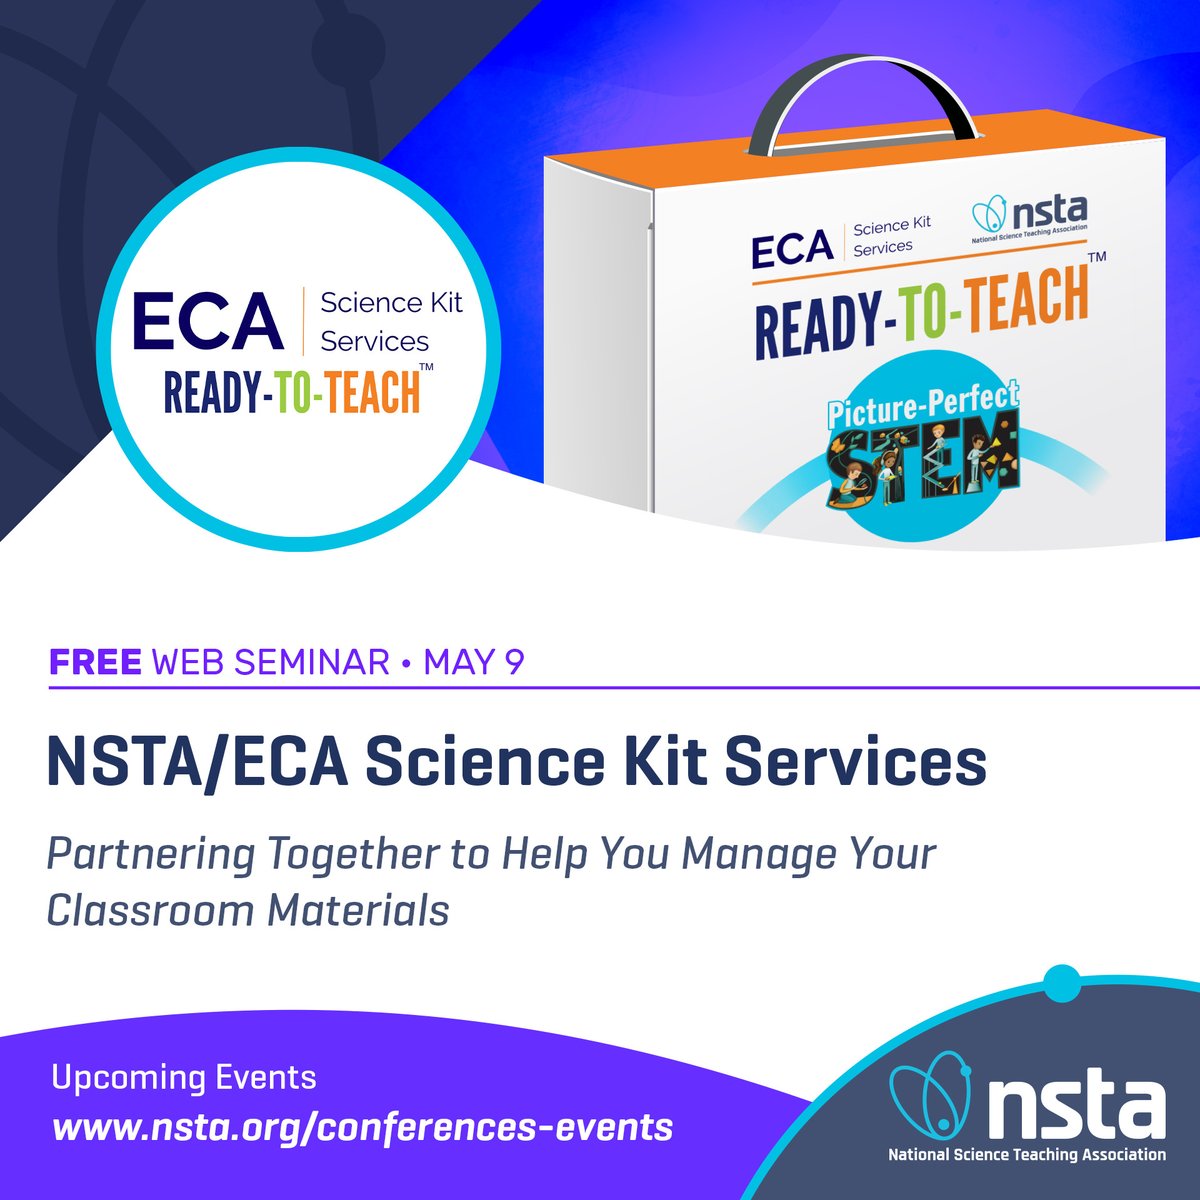 Join #NSTA TODAY @ 7 PM ET for a web seminar presented by @ECA_ScienceKits to learn about successful science material management in school districts and to discover new ways to set your district up for success! Register at bit.ly/3UD5AtB #SciEd #STEMEd